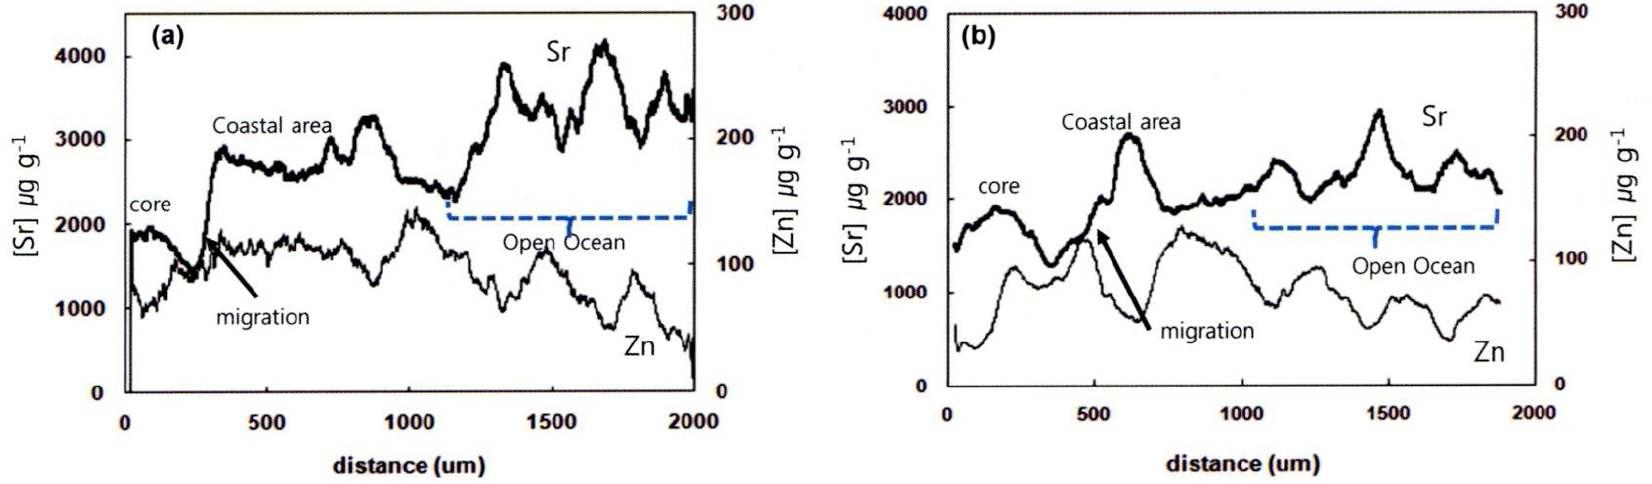 Combined photographic view of annual rings in otolith with line scan image from Japanese chum salmon. Small box contains the profiles of Sr (top) and Zn (bottom) concentrations scanned from nucleus to edge. Four yearly oscillations in strontium concentration matched with annuli in otolith photo